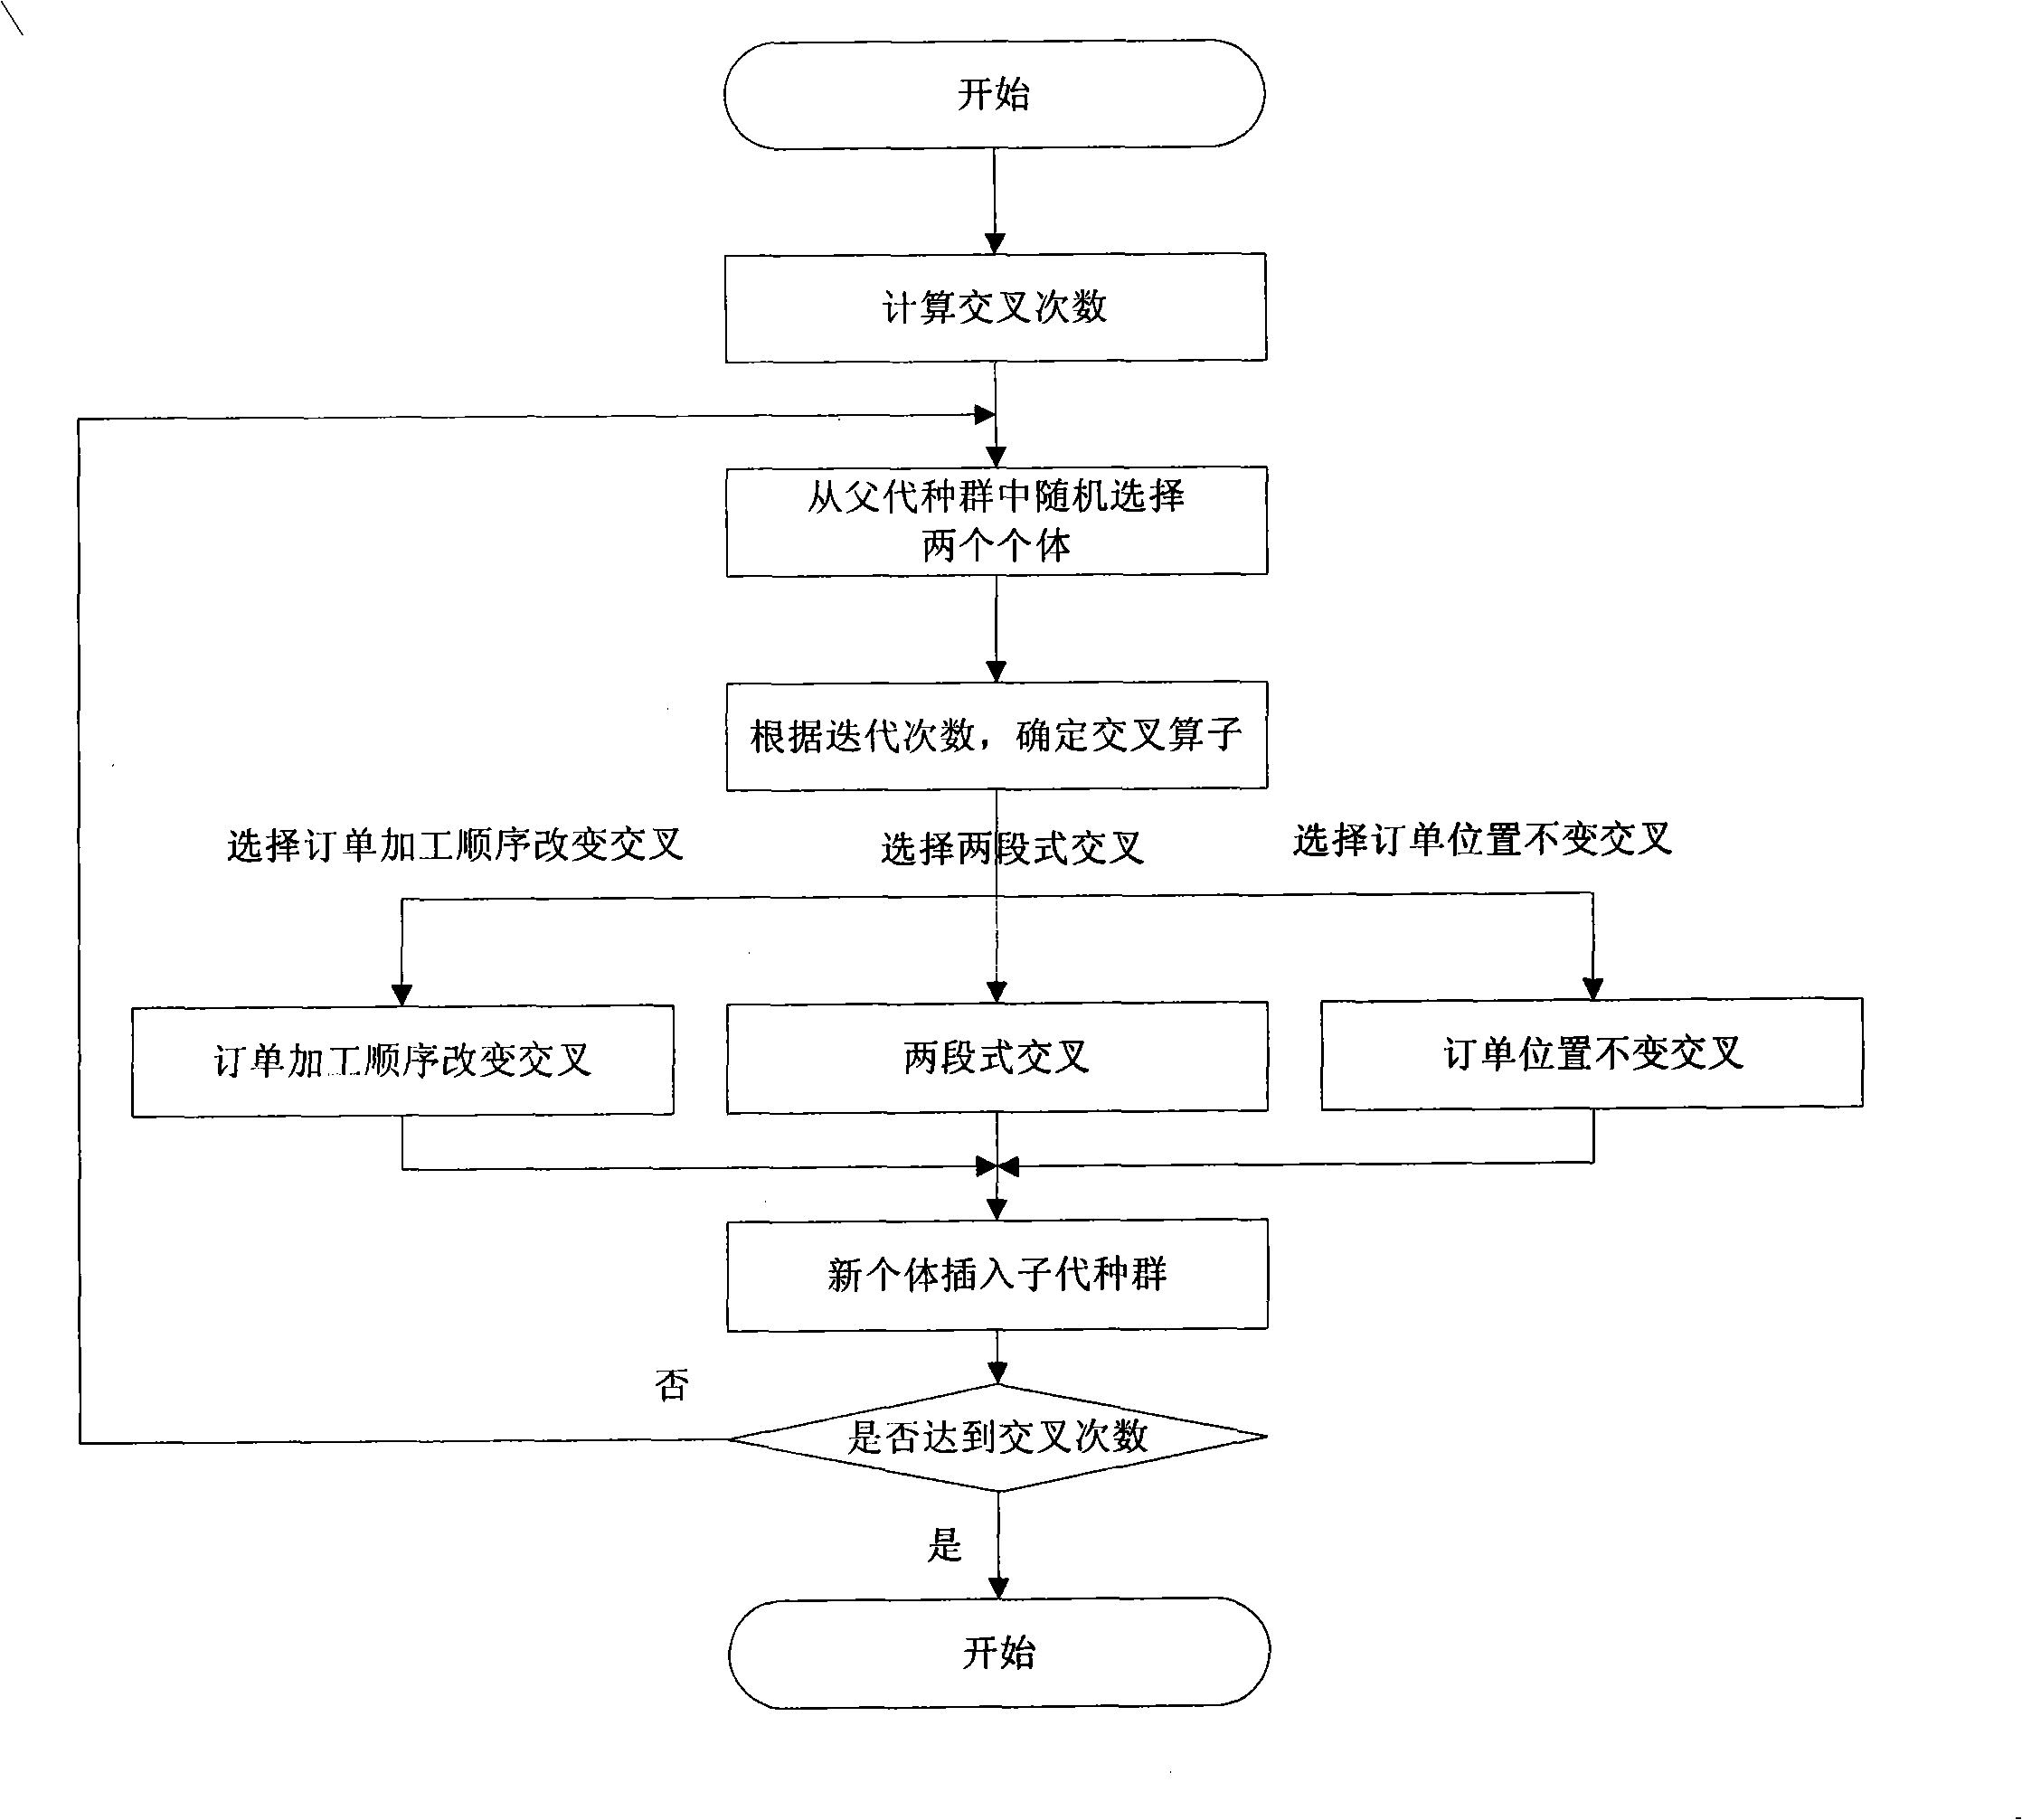 Genetic operation operator based on indent structure for producing quening system